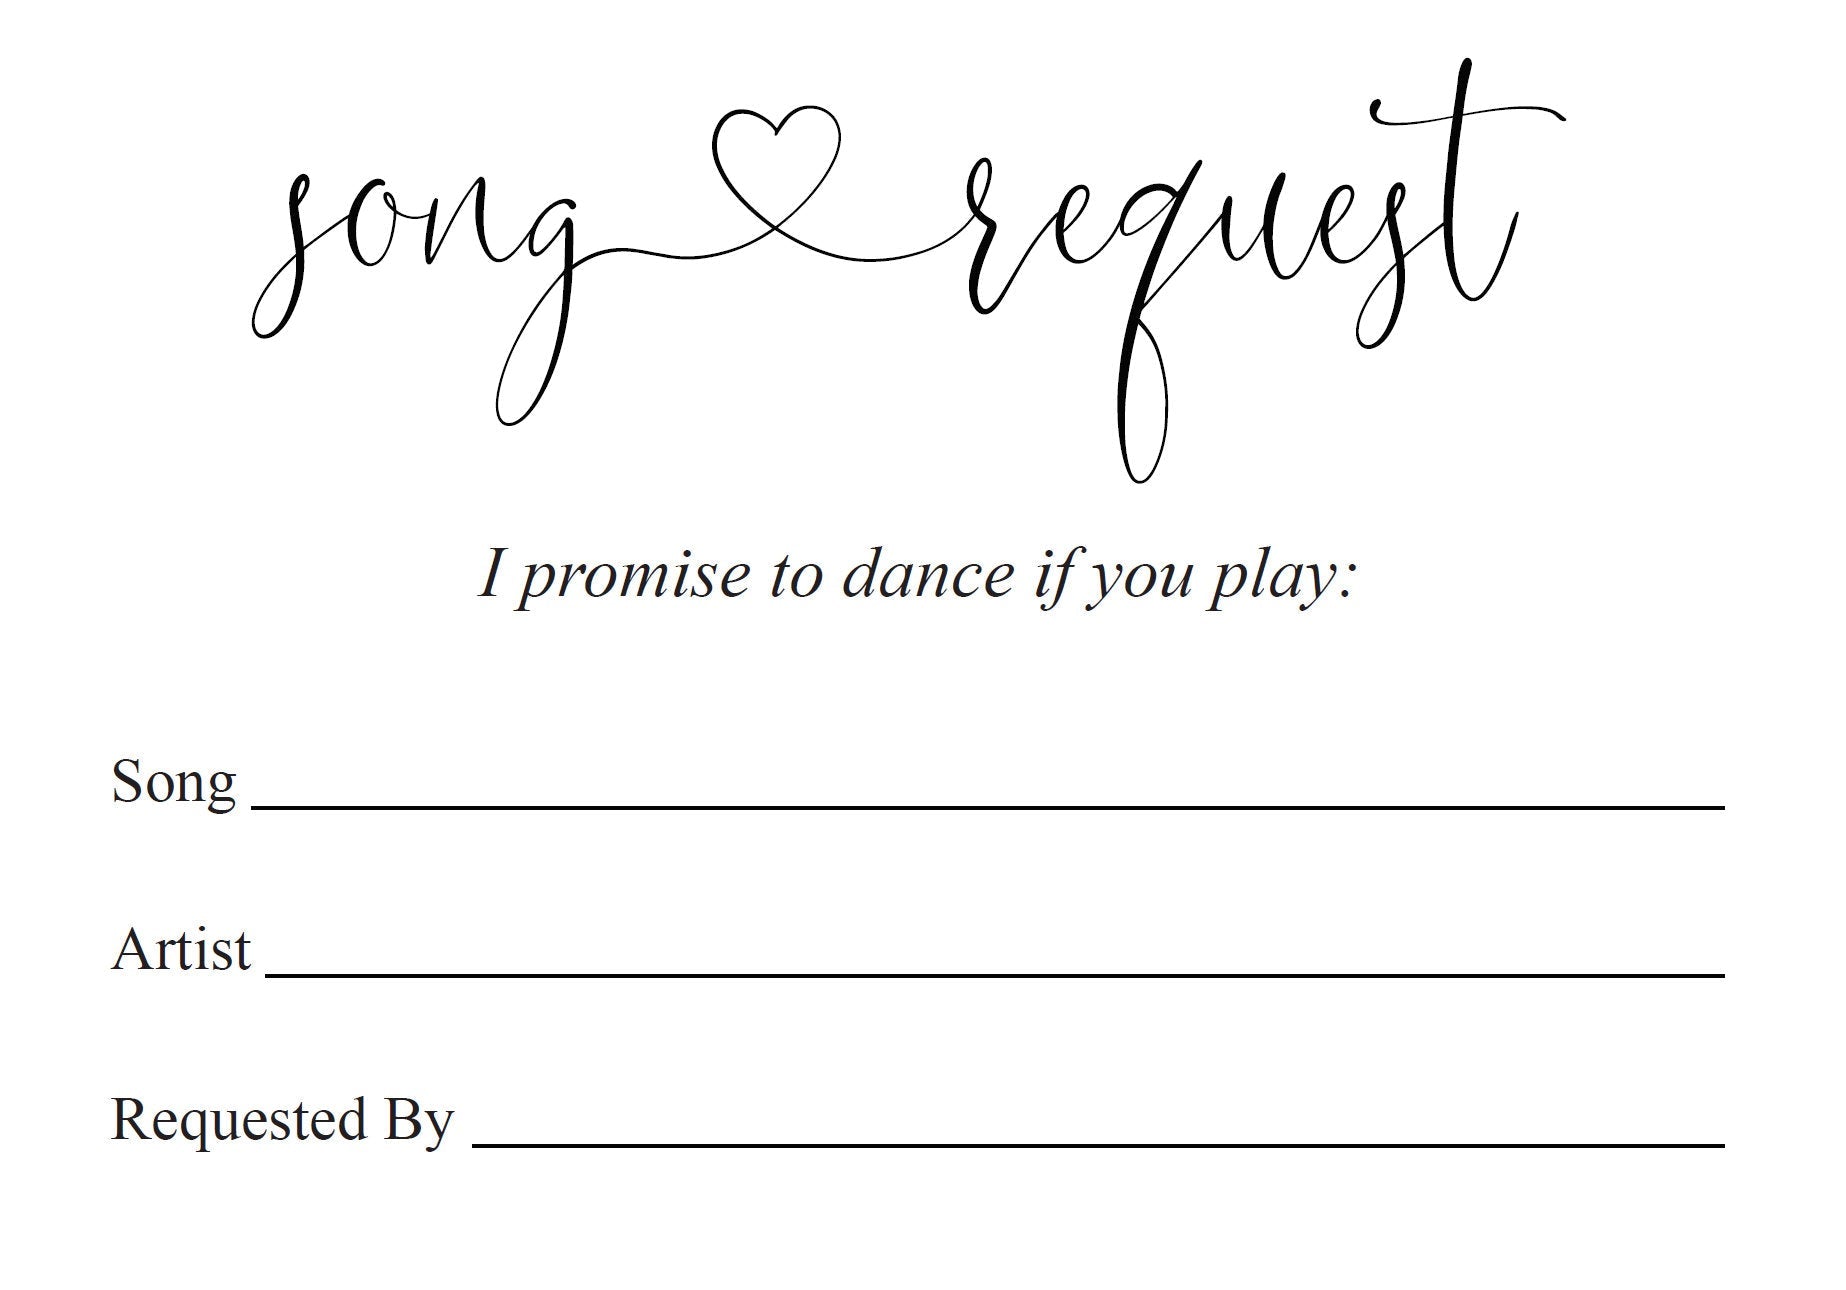 Let's dance card, Song Request Insert Card Template, Dancing Card, Dance Card, RSVP, Wedding Song Request, Rustic  - Heather TAGS | TY | INSERTS SAVVY PAPER CO